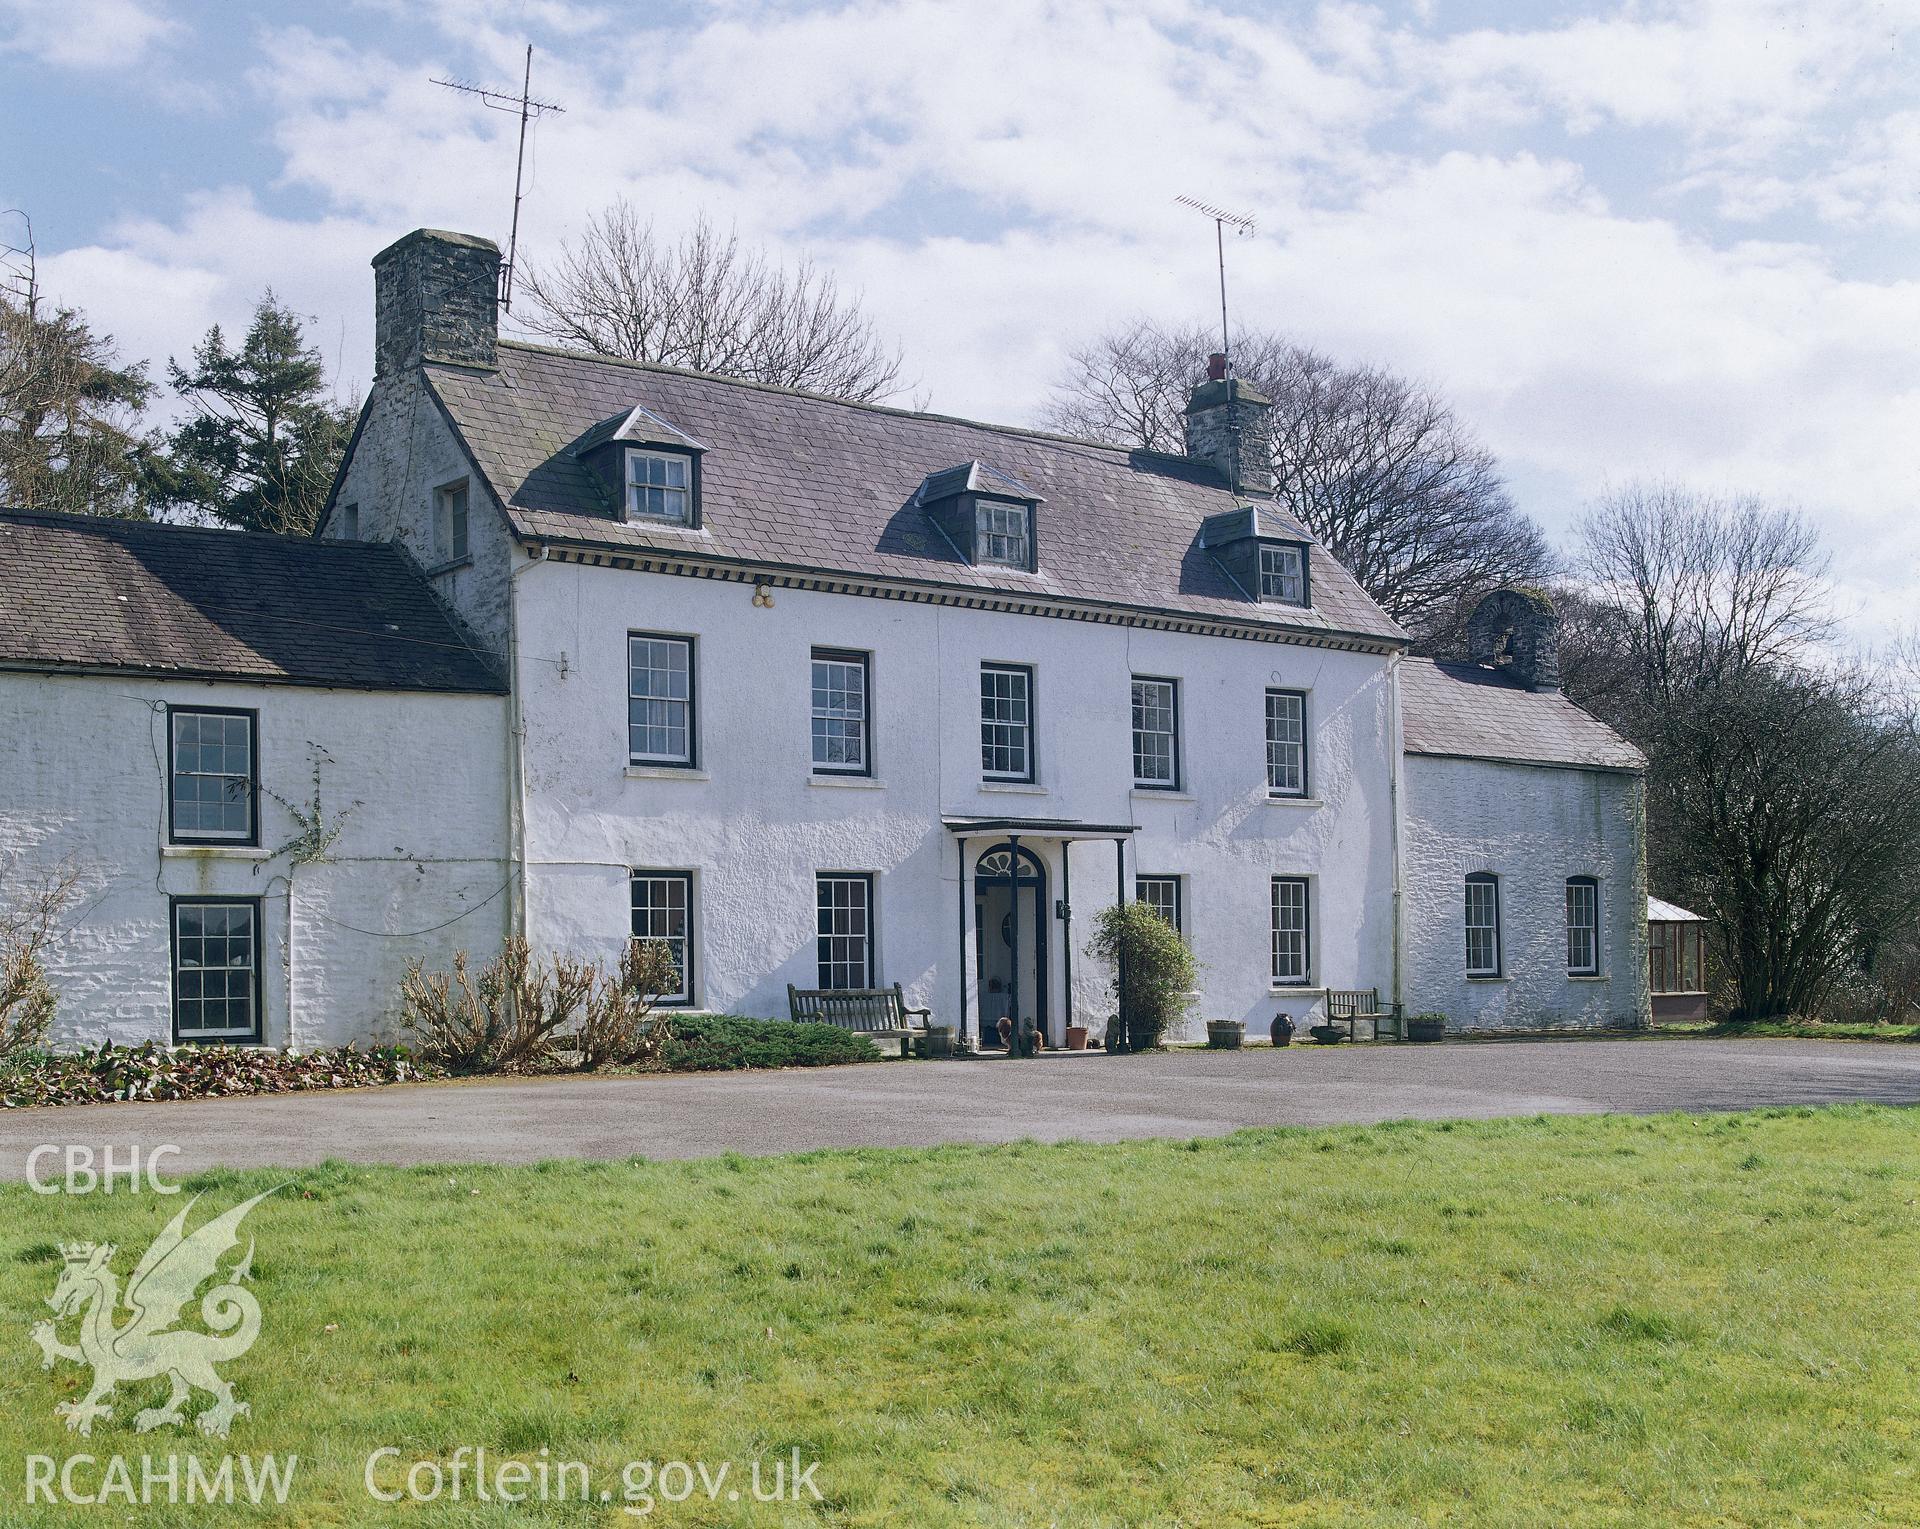 RCAHMW colour transparency showing exterior view of Ty Glyn, Dyffryn Arth